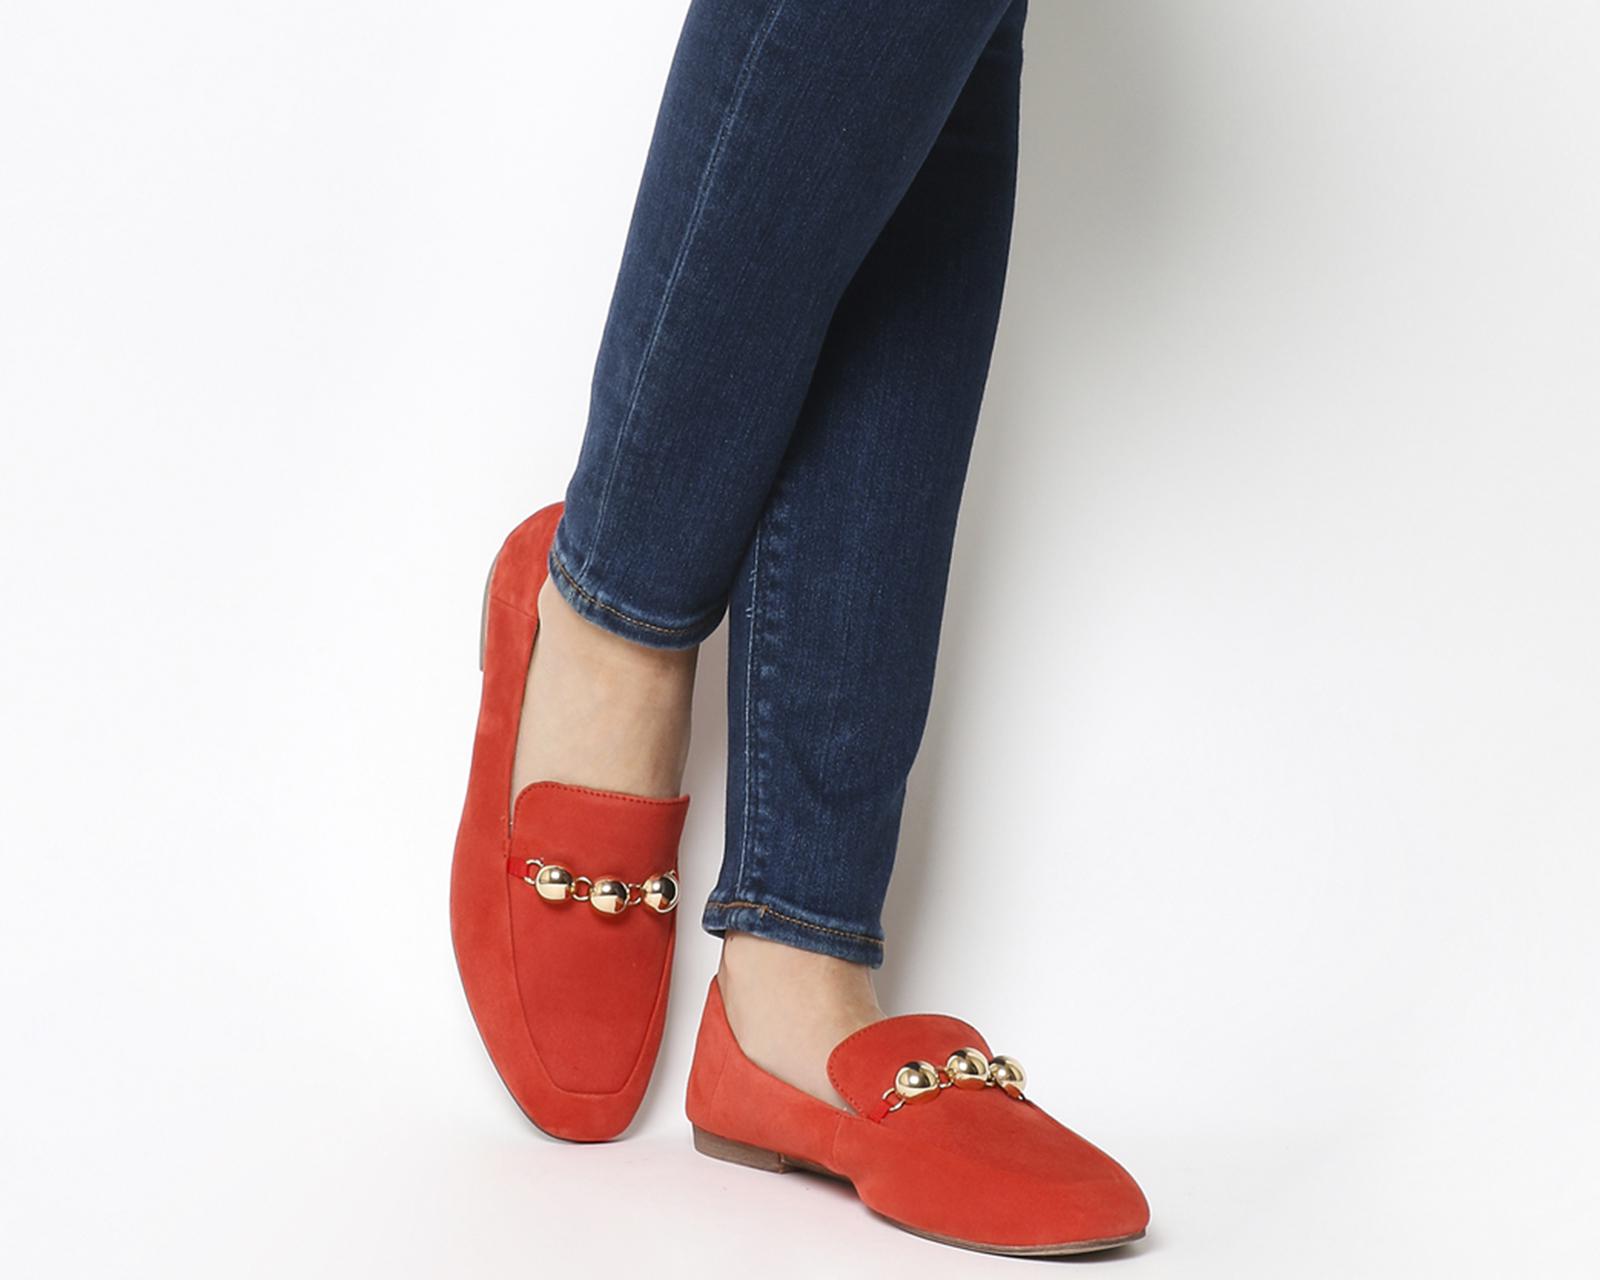 Vagabond Suede Ayden Buckle Loafers in Coral (Red) - Lyst